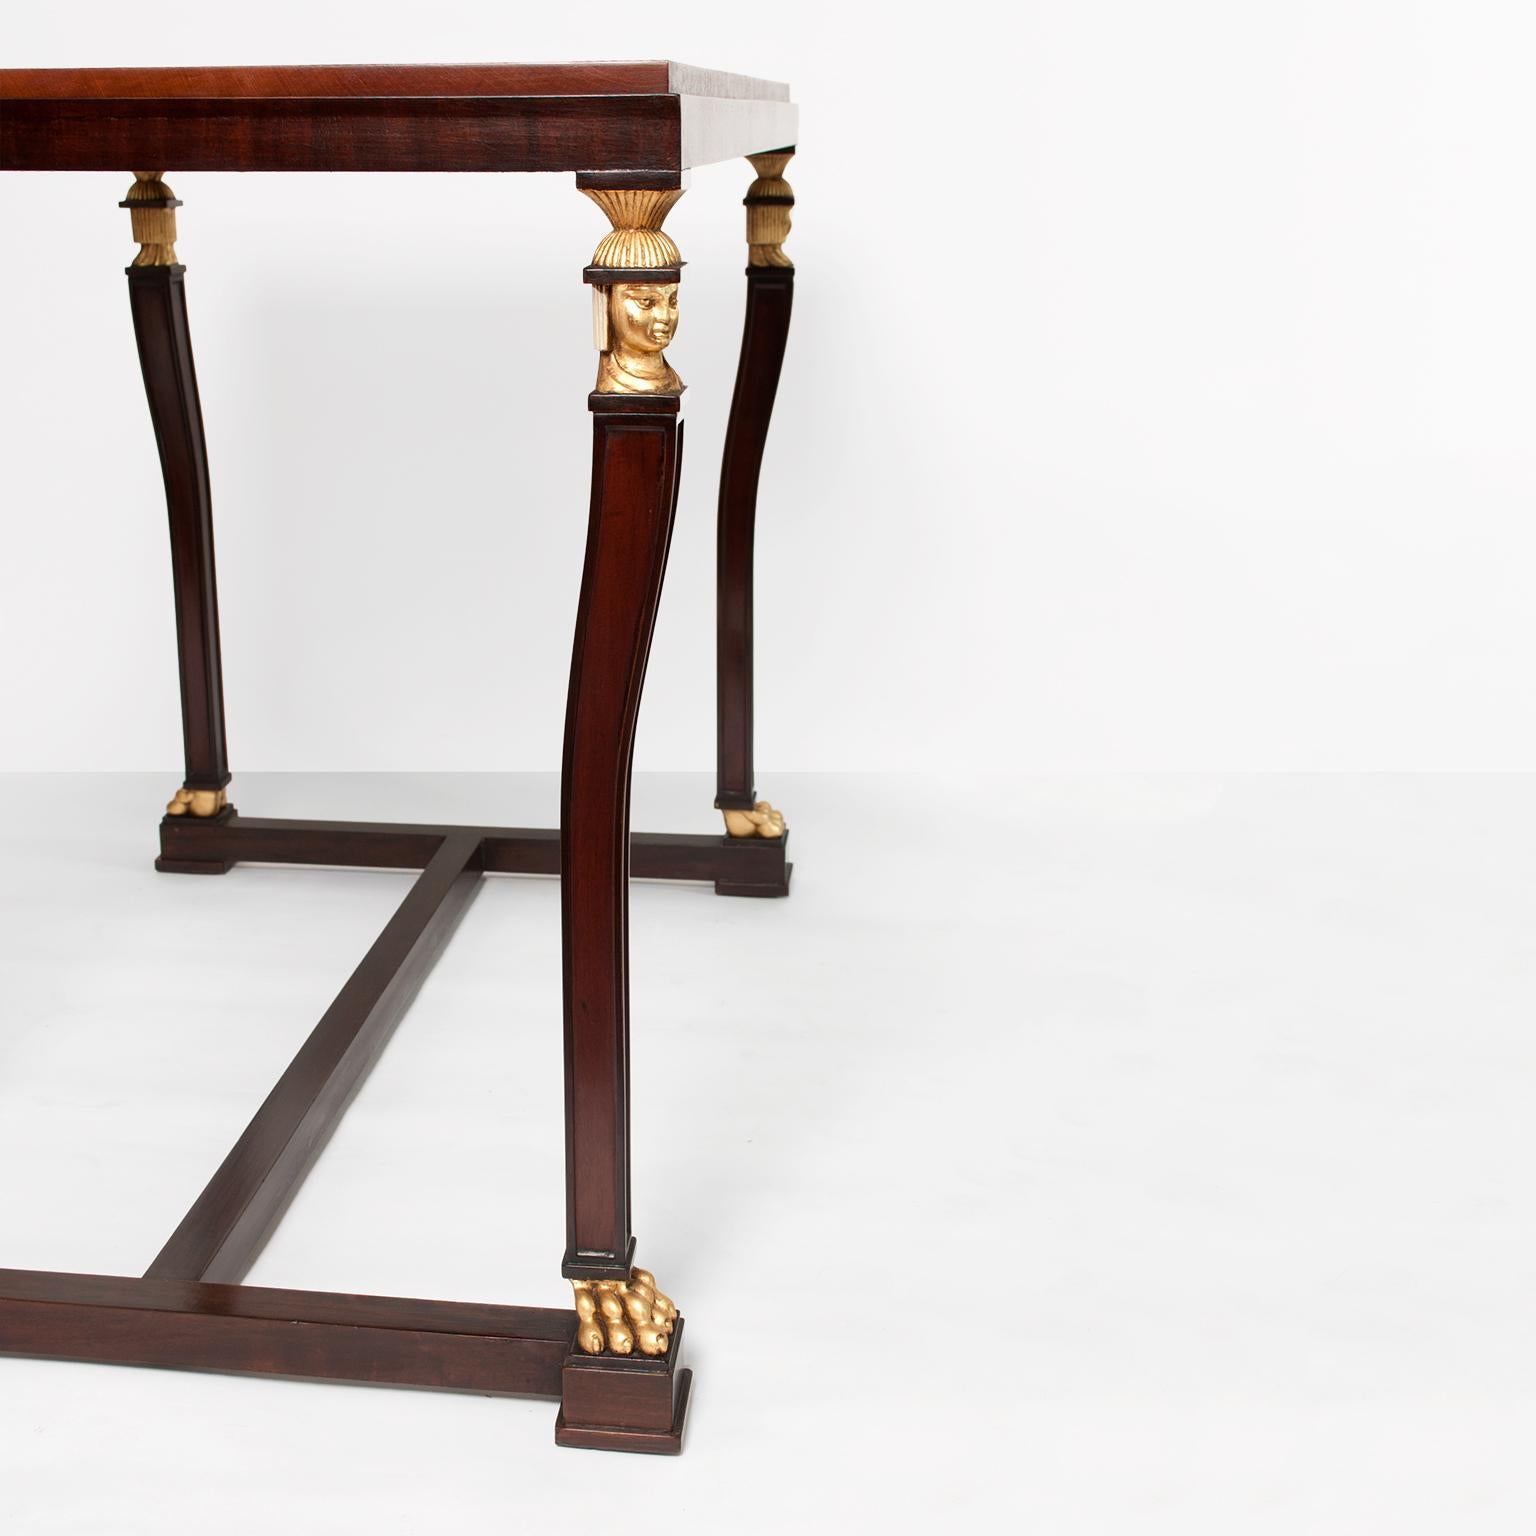 Marquetry Axel Einar Hjorth Swedish Grace Mahogany Console Center Table for NK, Stockholm